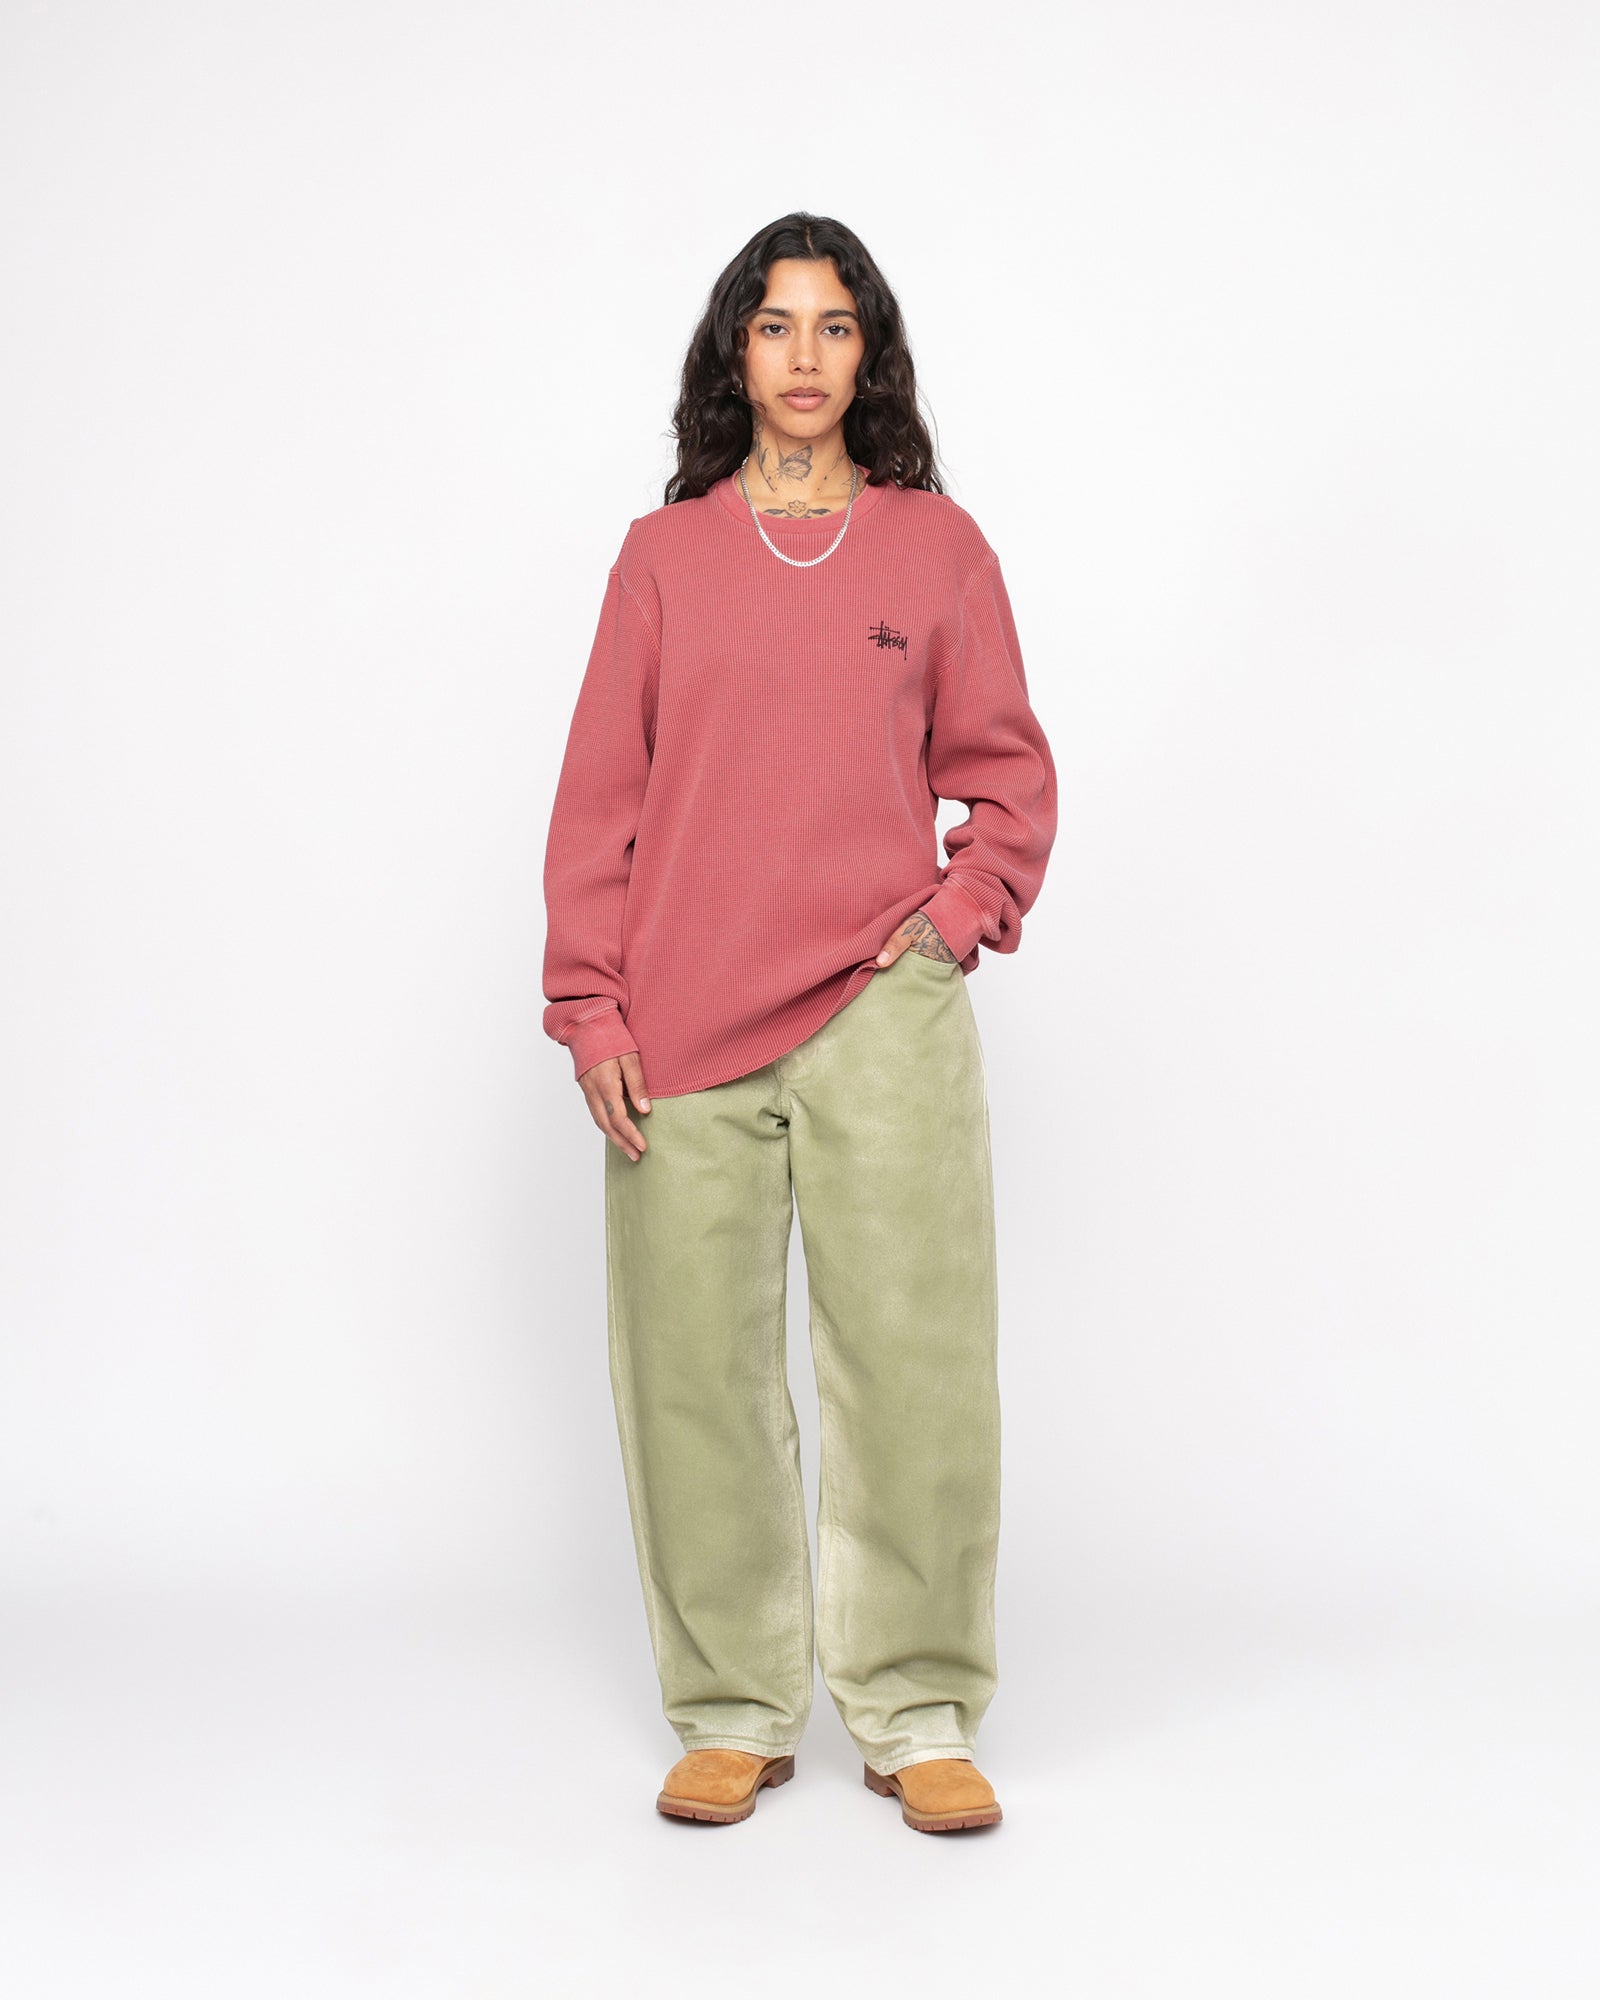 Stüssy Basic Stock Ls Thermal Berry Tops